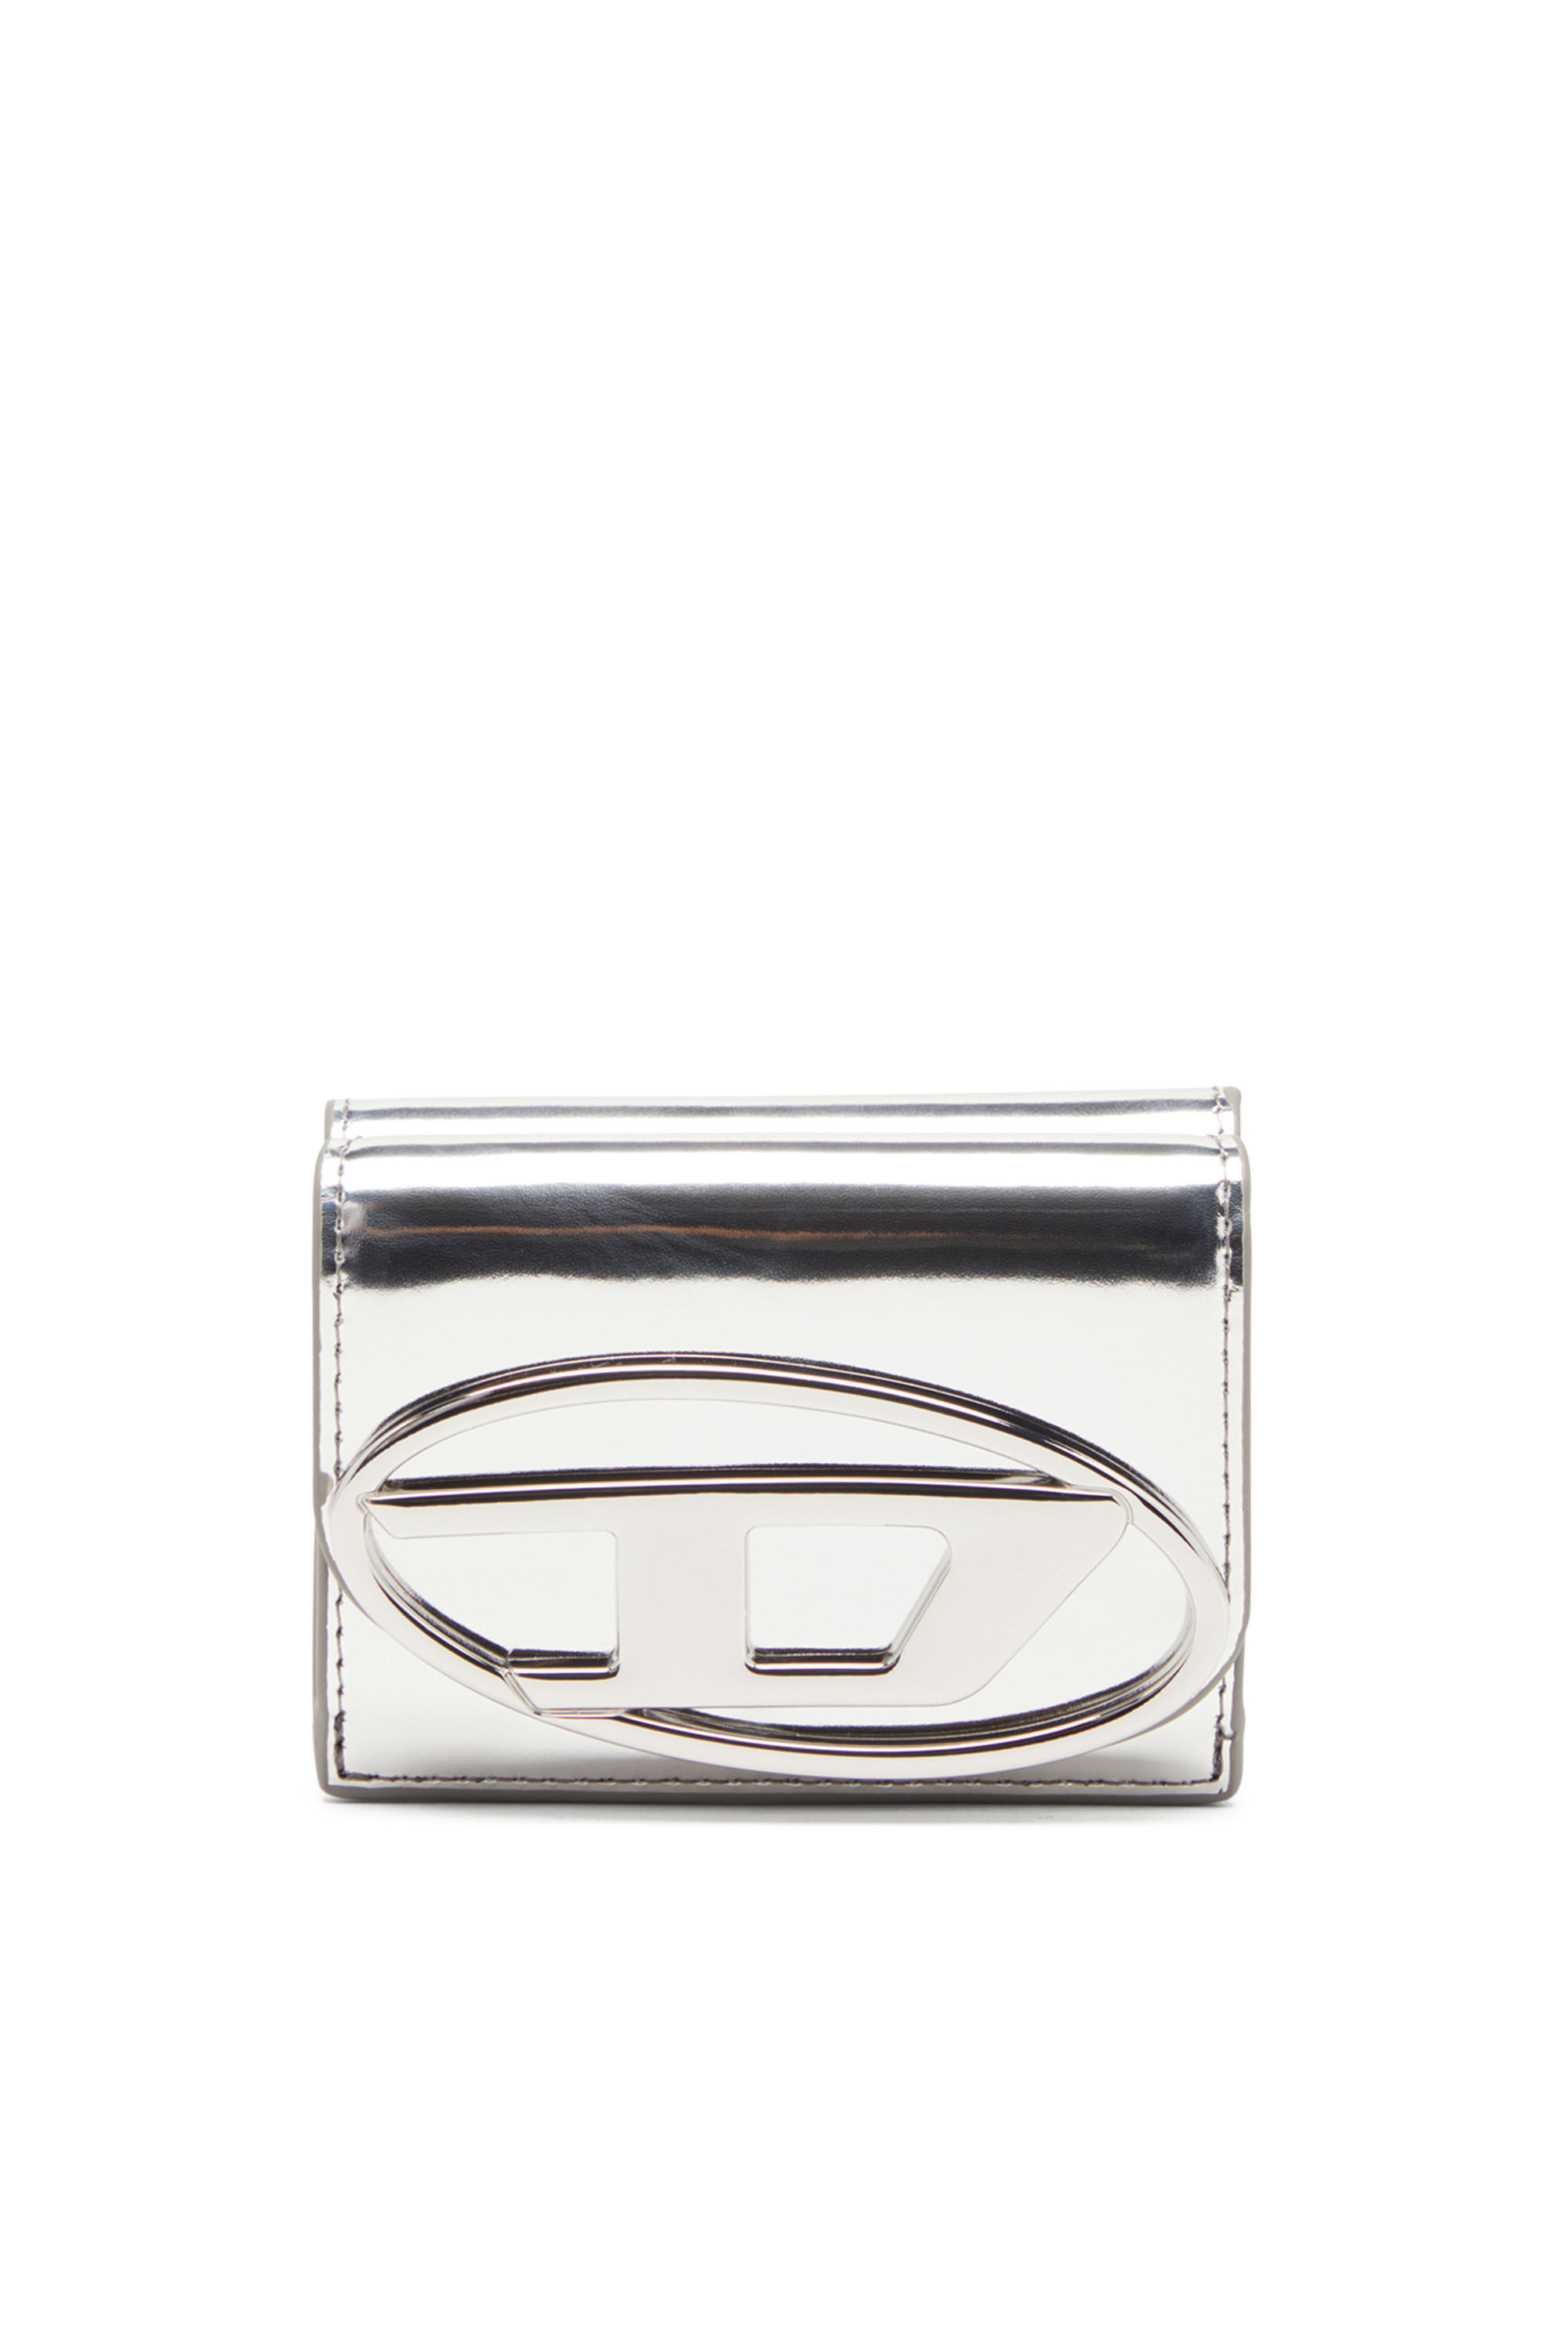 Diesel - 1DR TRI FOLD COIN XS II, Female Tri-fold wallet in mirrored leather in シルバー - Image 1